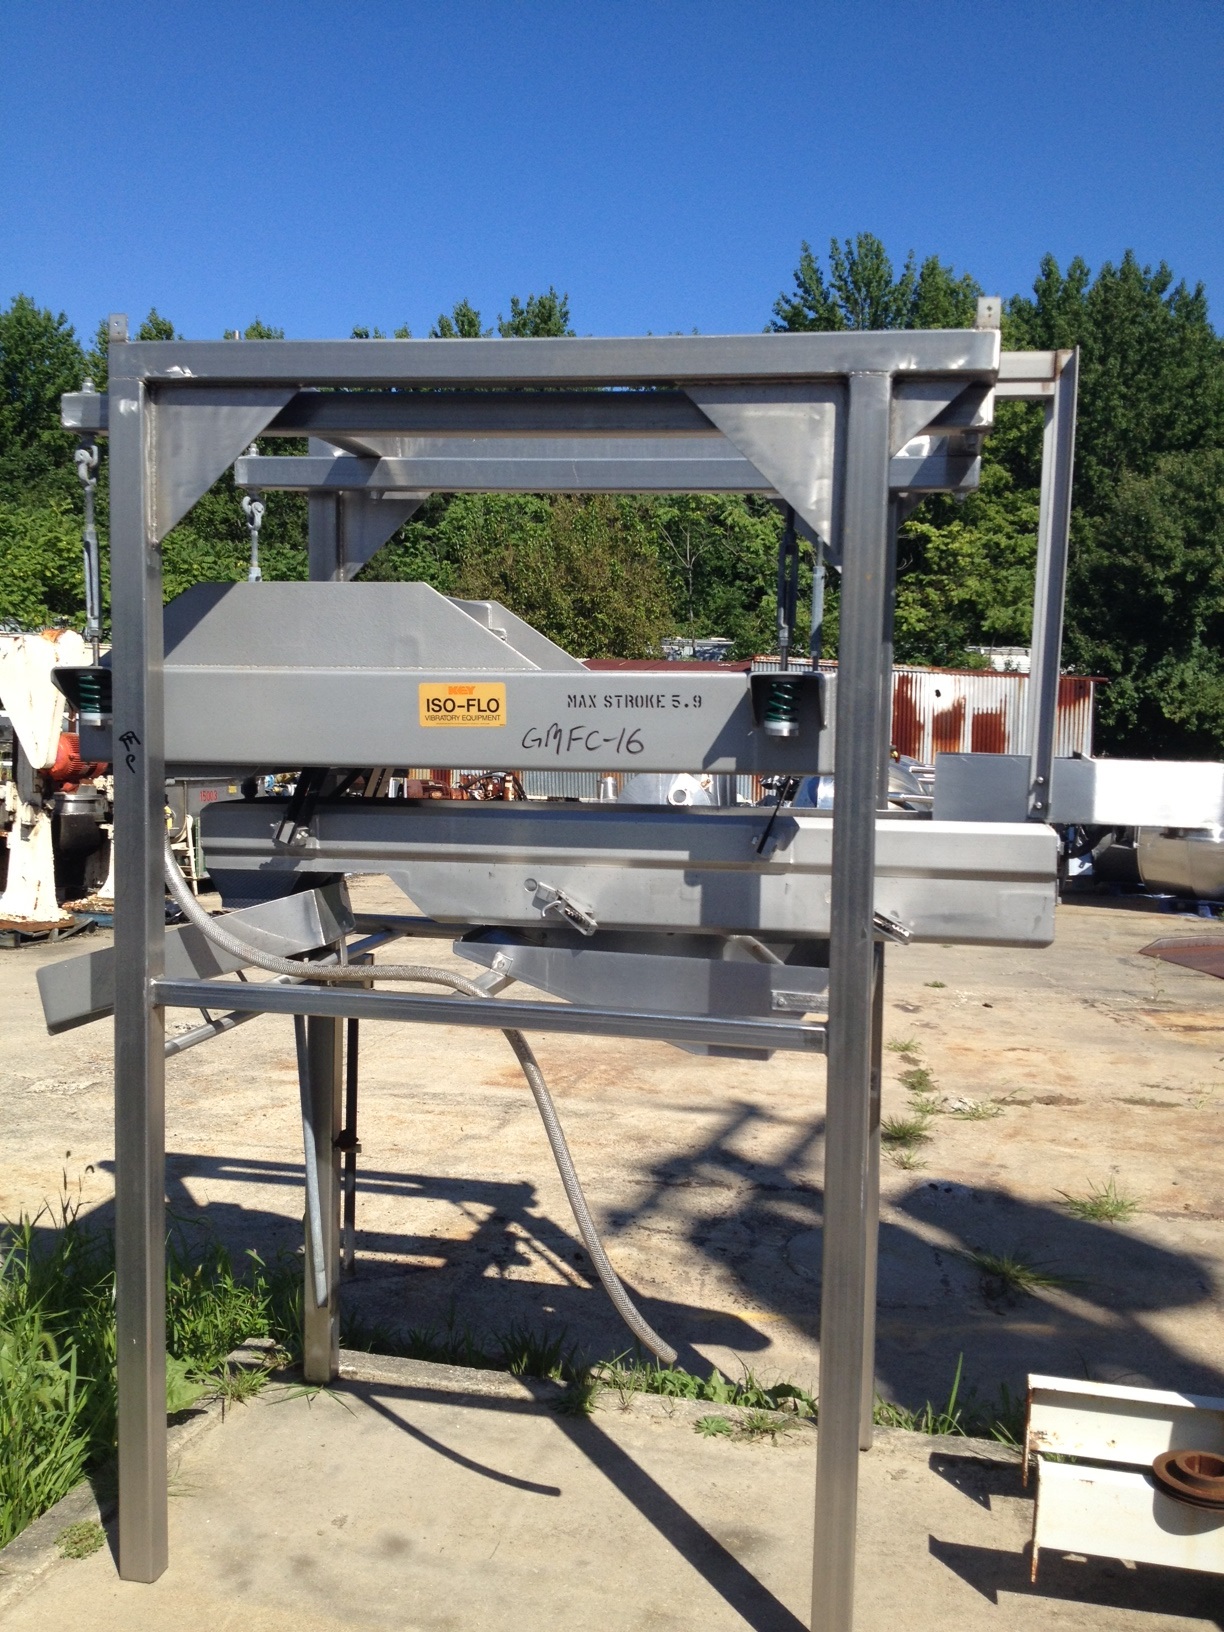 Key Iso-Flo Vibratory Conveyor, Vibrating Shaker/Feeder with de-watering screen. Suspended in frame. Conveyor/shaker is 1' wide x 6' Lgth. Has dewatering screen and pan feeder. Approx. 8'4